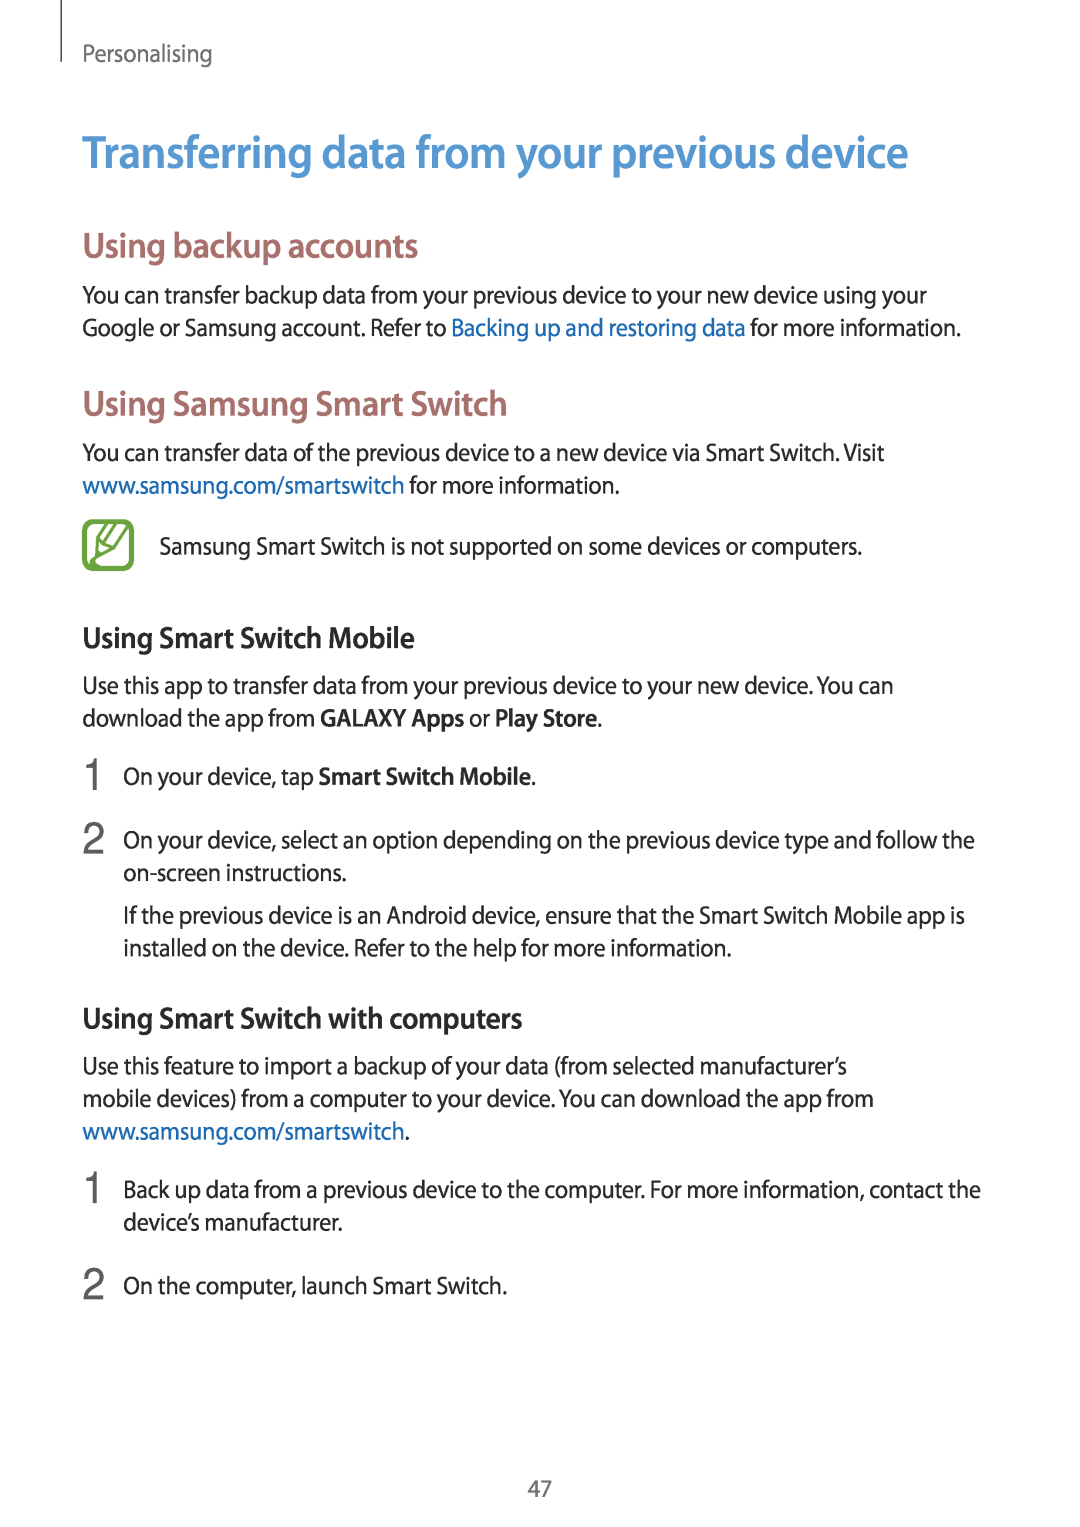 Samsung SM-A300FZWUPRT Transferring data from your previous device, Using backup accounts, Using Samsung Smart Switch 